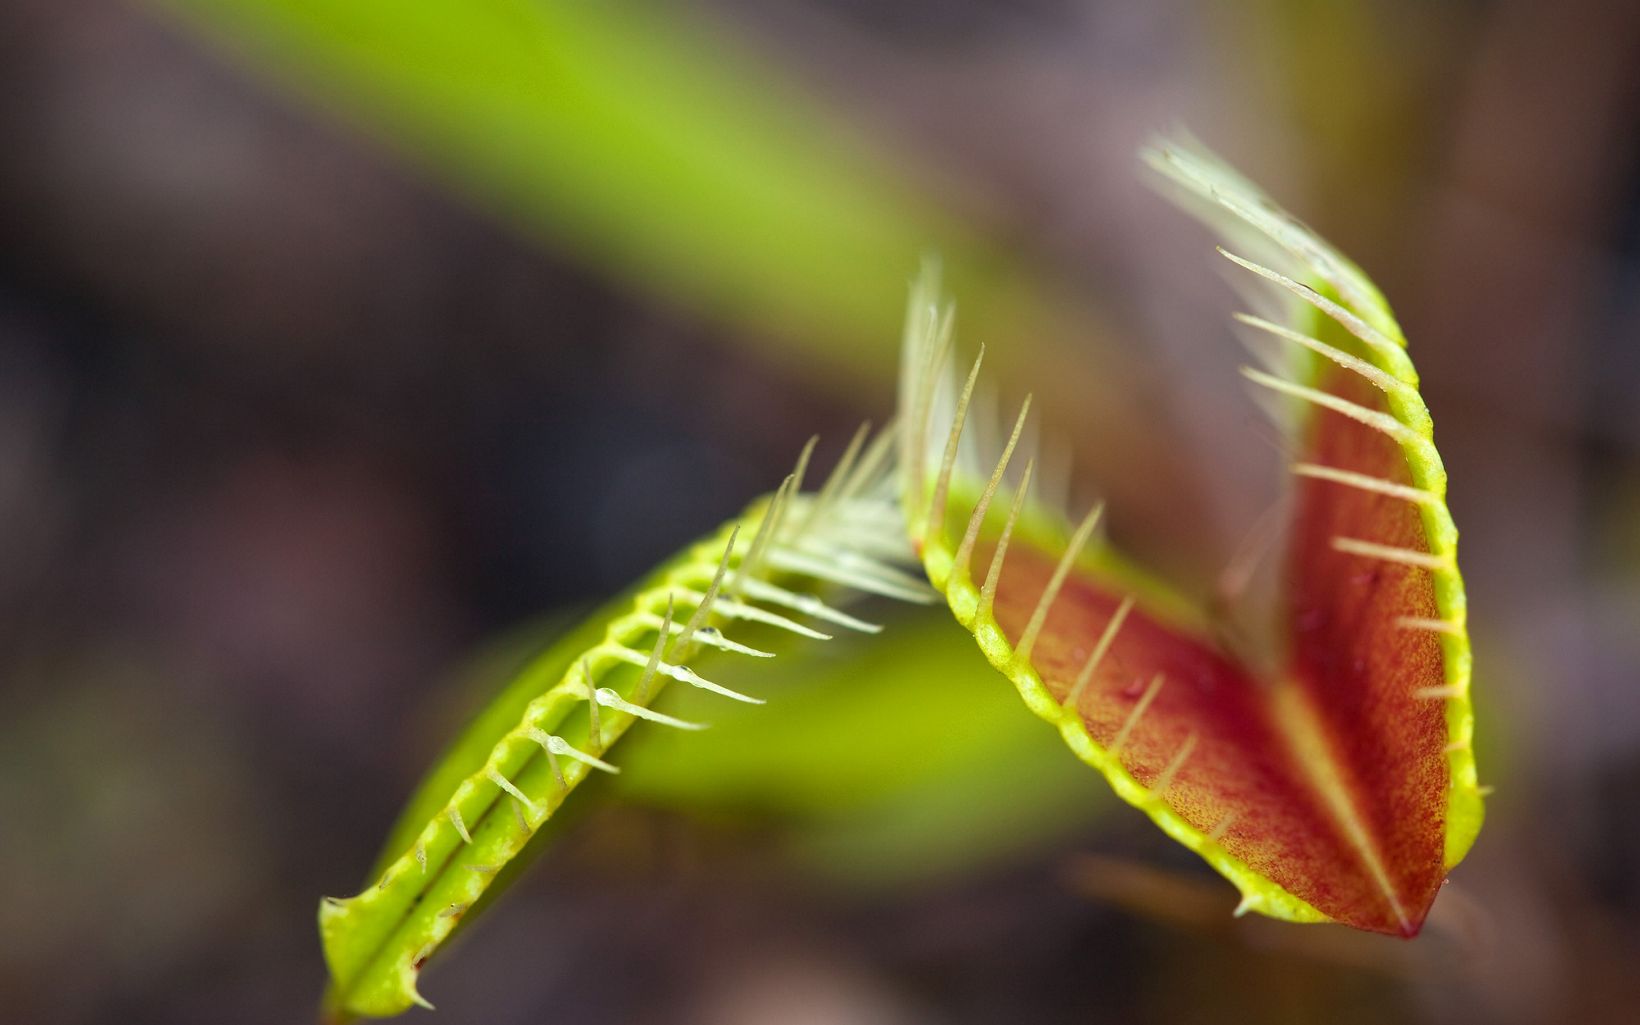 Extreme closeup of the trap leaves of a venus flytrap.